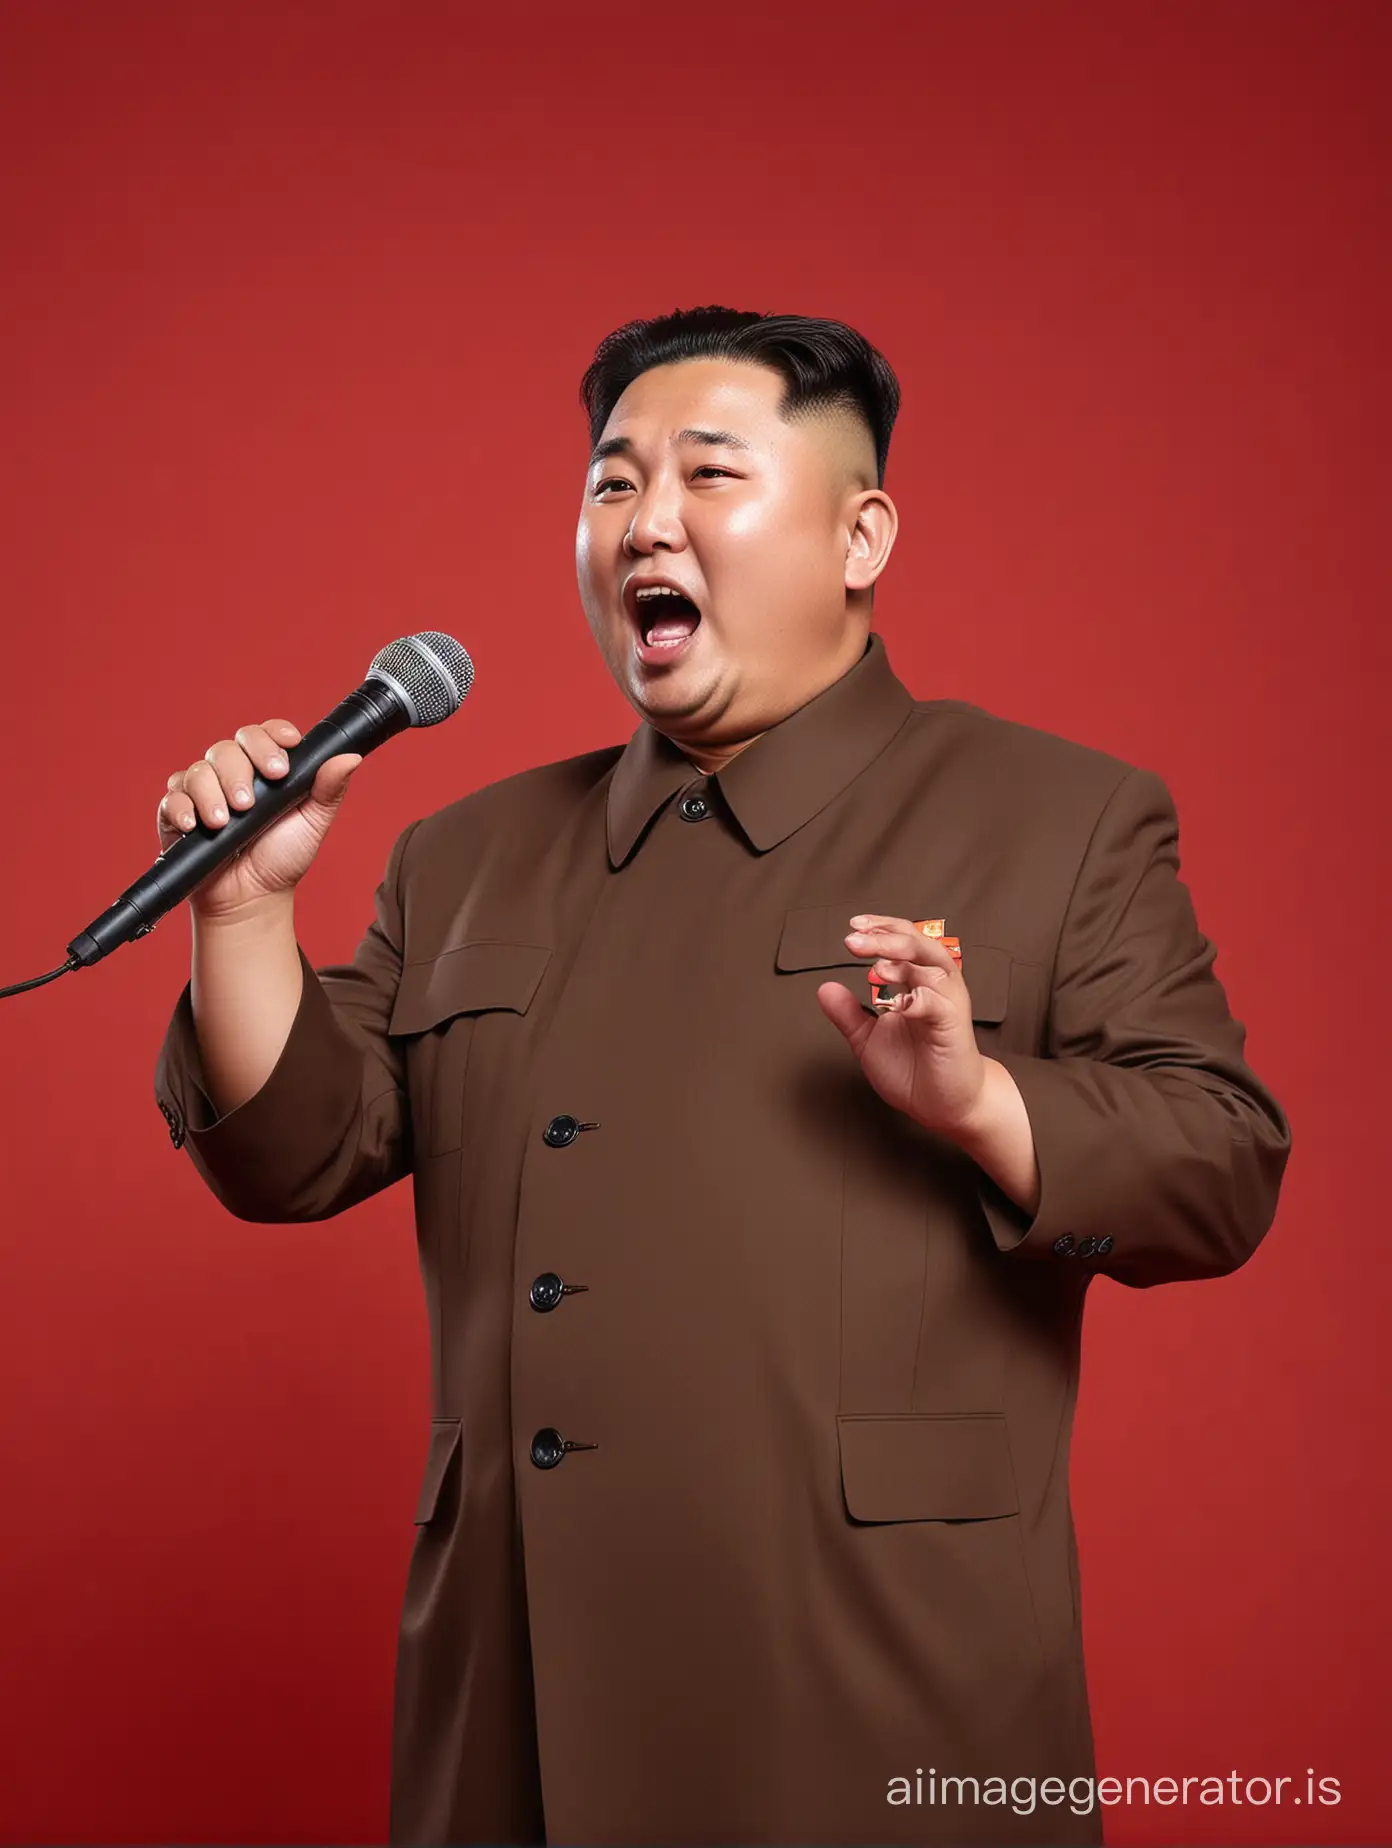 Kim-Jong-Un-Singing-a-Song-on-Red-Background